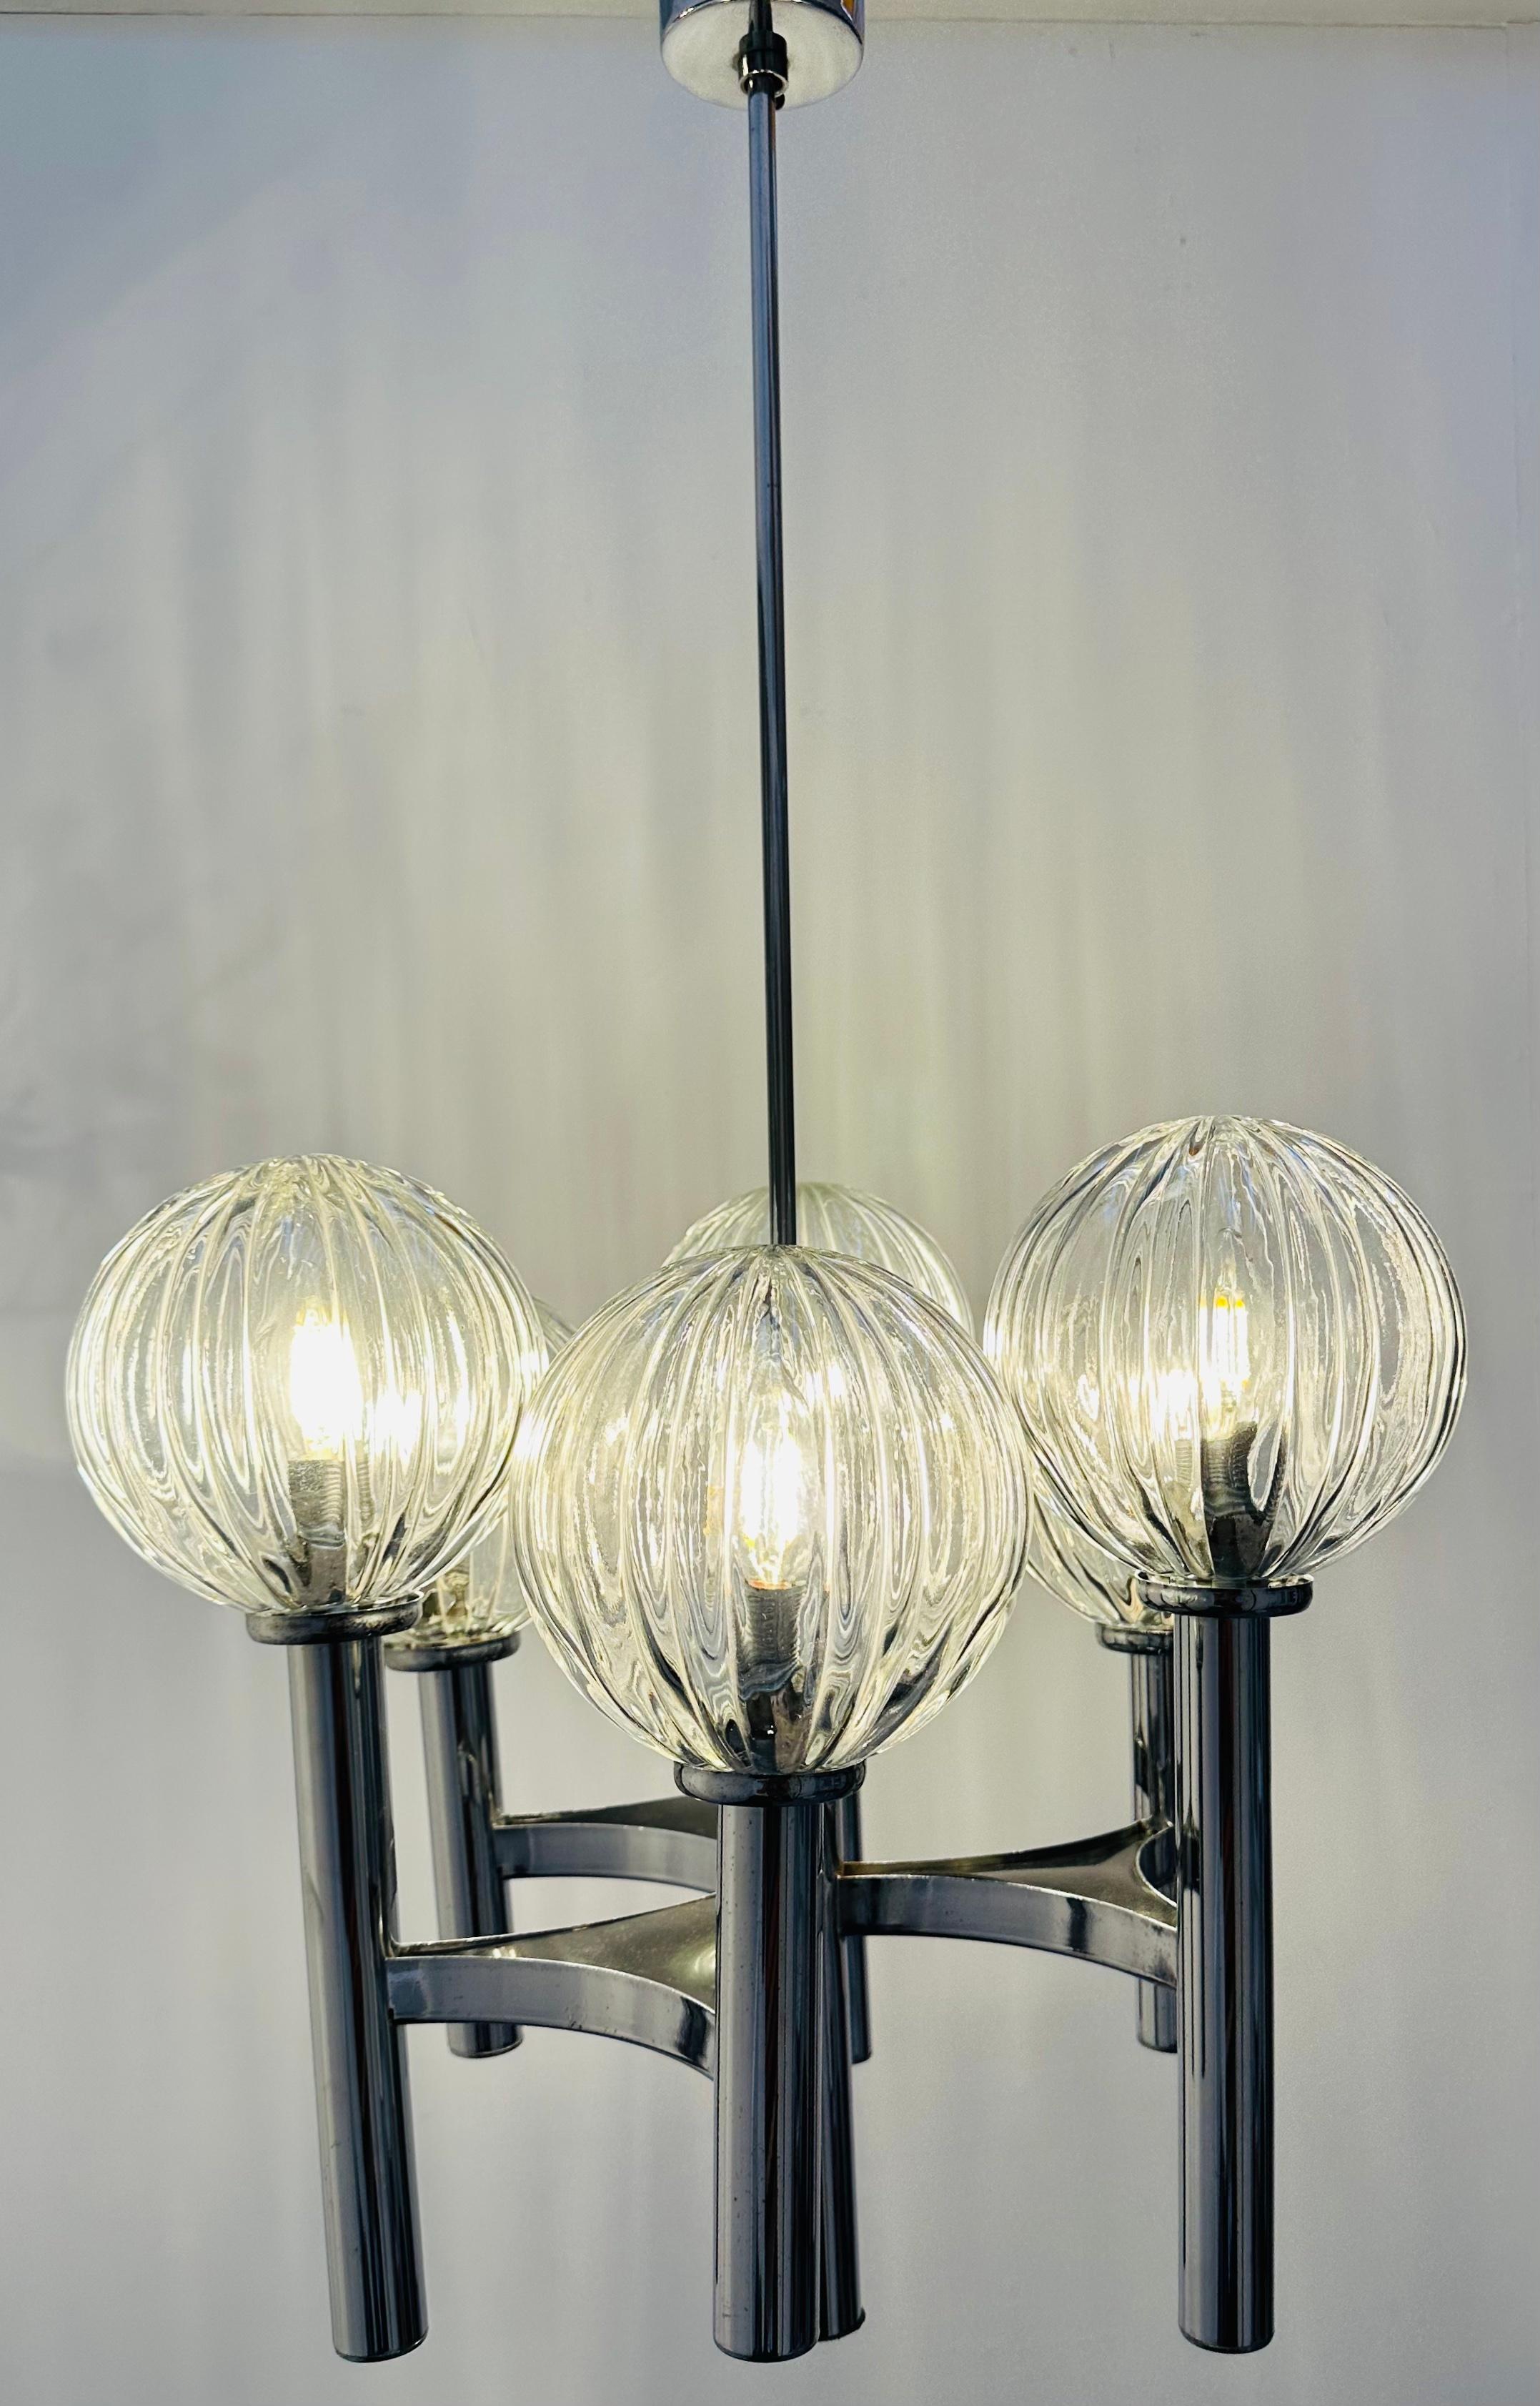 1970s Italian glass globe and polished chrome chandelier. Attributed to Gaetano Sciolari for Sciolari Lighting.   The six thick and heavy vertically-ribbed clear-glass globes securely clip onto the vertical chrome tubular columns which are connected